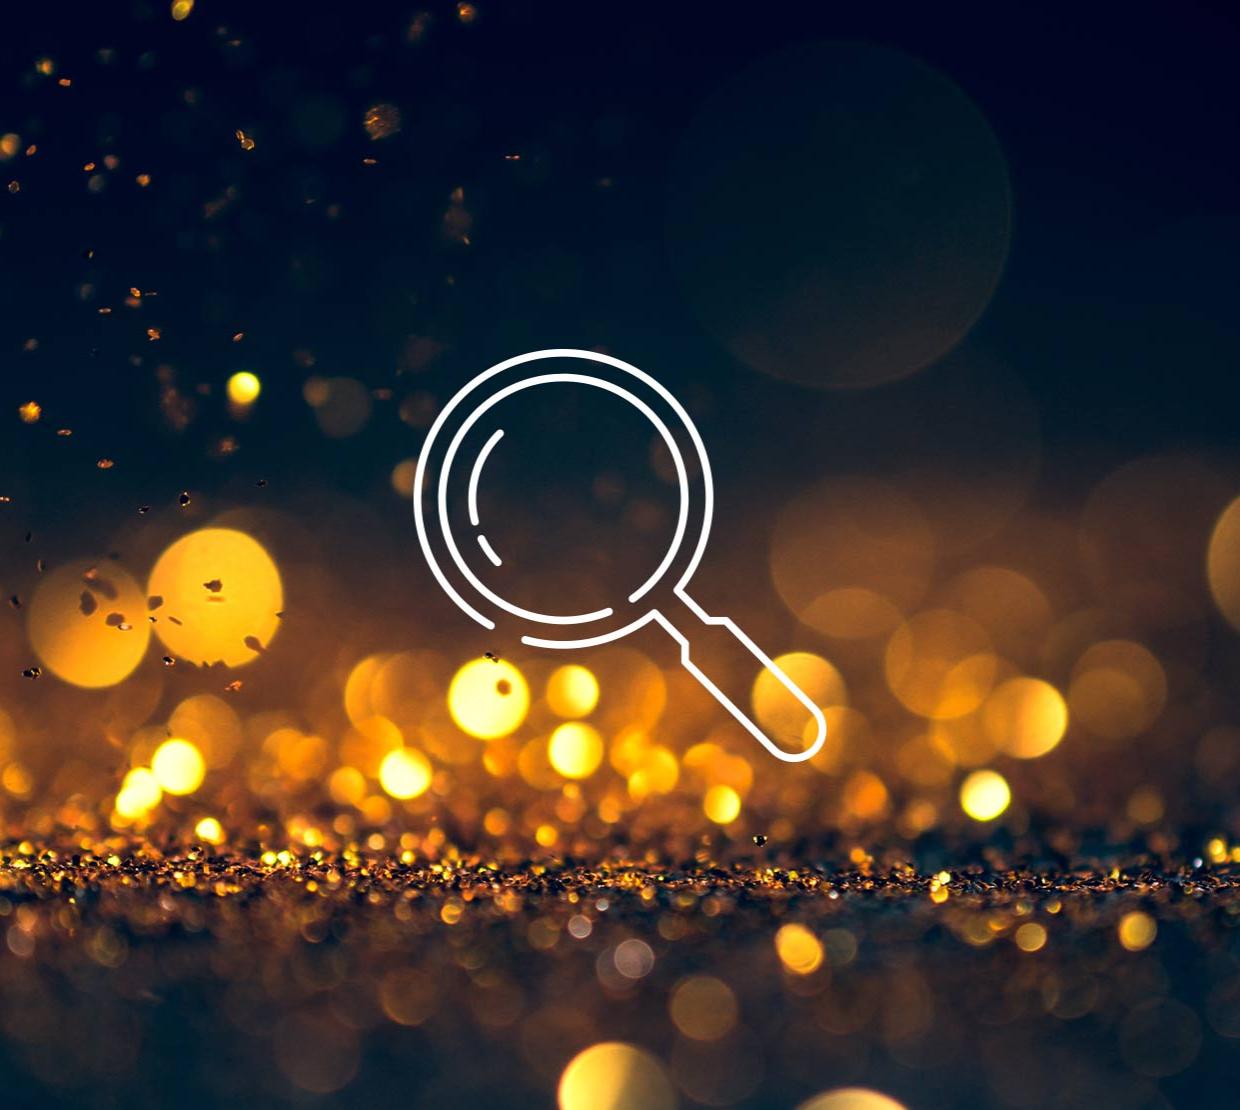 magnifying glass icon above light texture